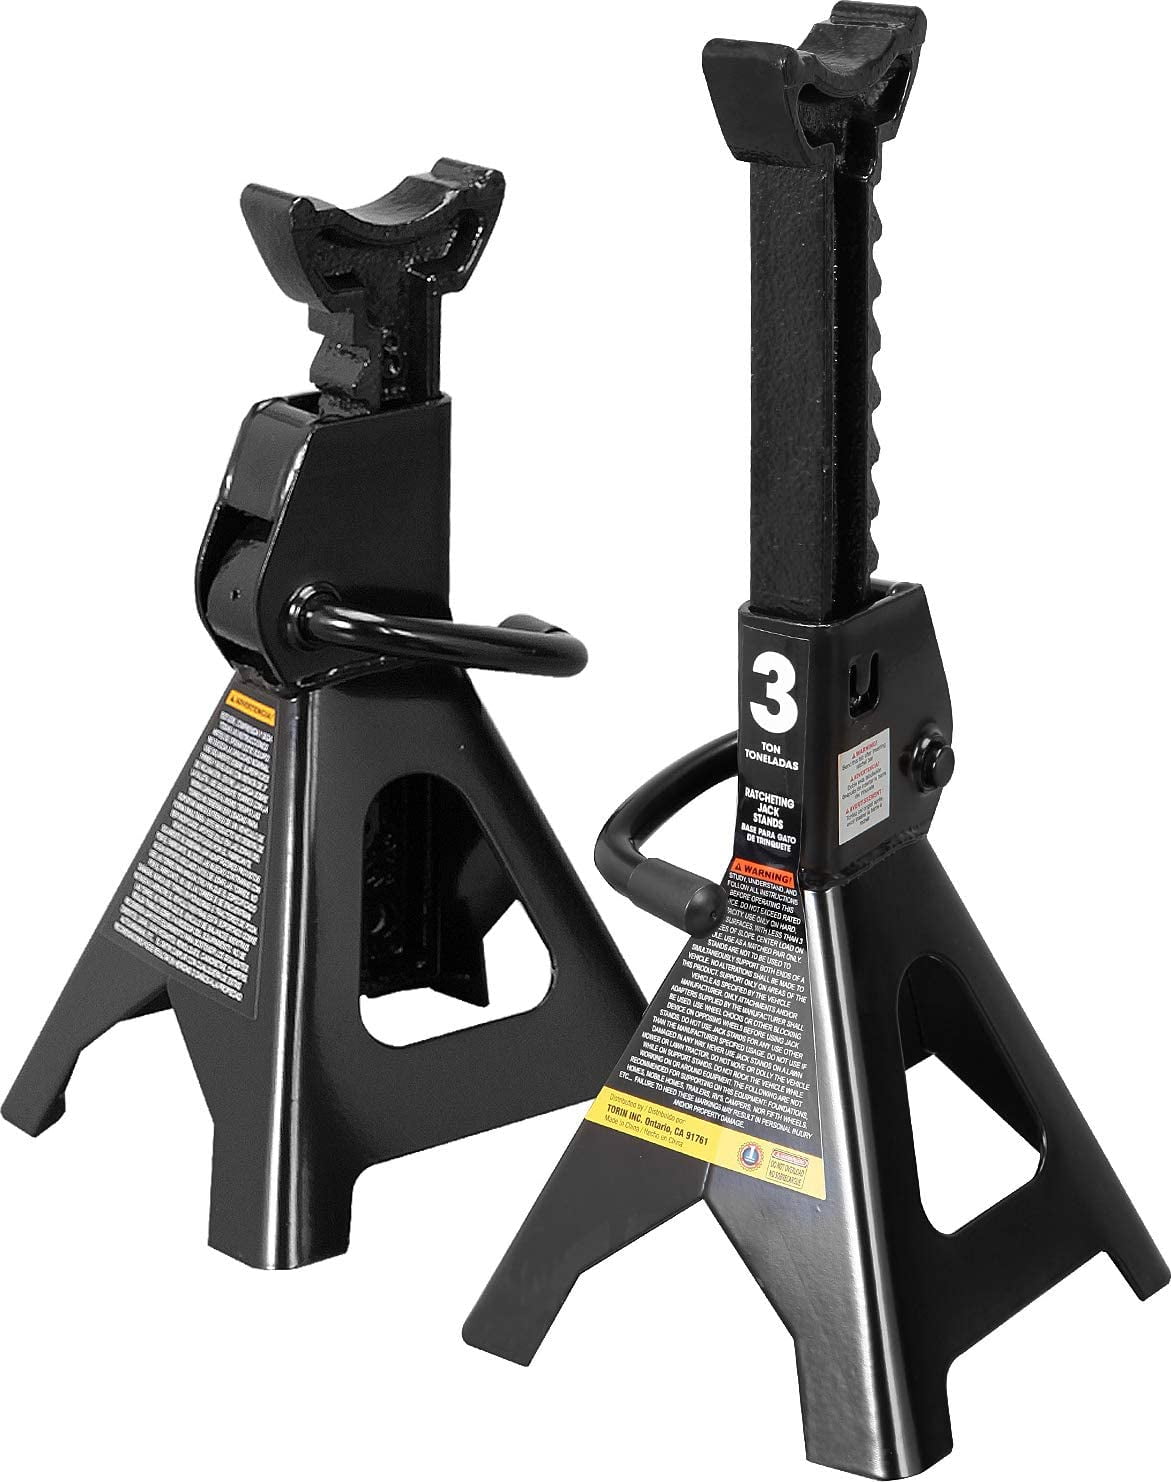 Pro-LifT PL3300 Heavy Duty Jack Stands For Car – 3 Ton in Pair with Double  Pins - Handle Lock and Mobility Pin for Extra Safety – Great for Home Auto